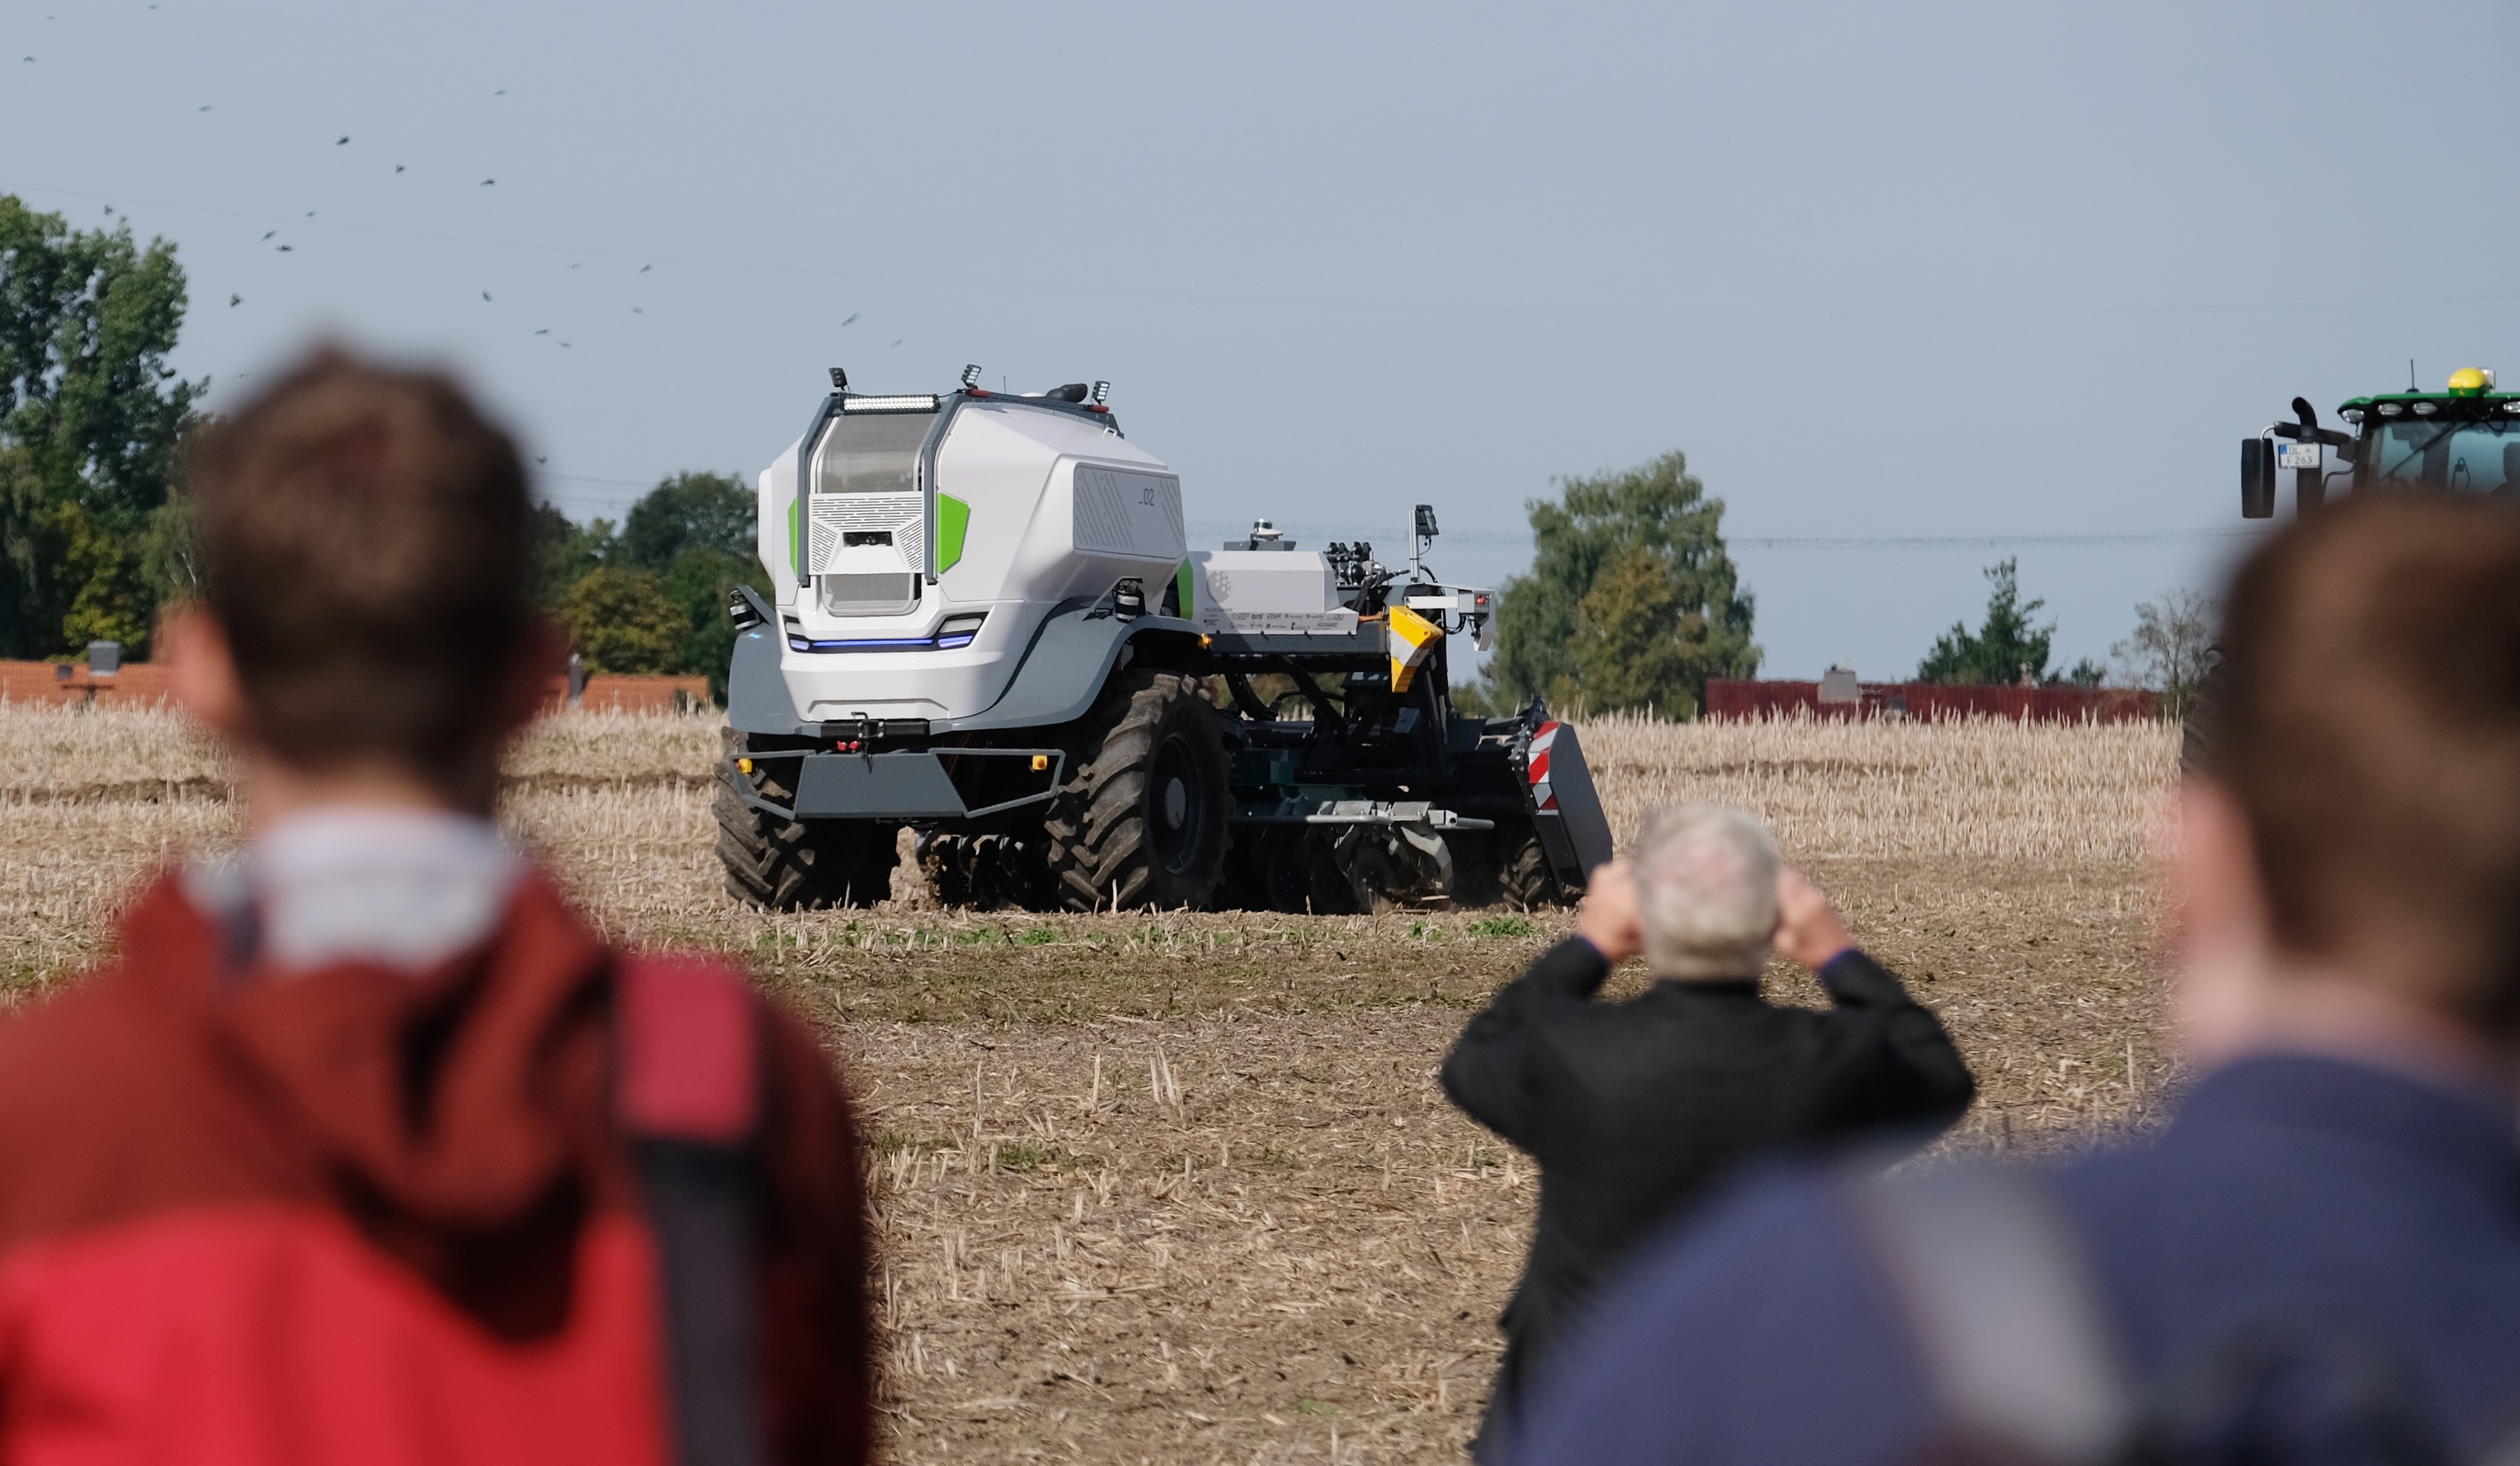 The "FSE 2" field robot at a 2021 technology show in a field in northern Saxony. The device can work the soil independently.